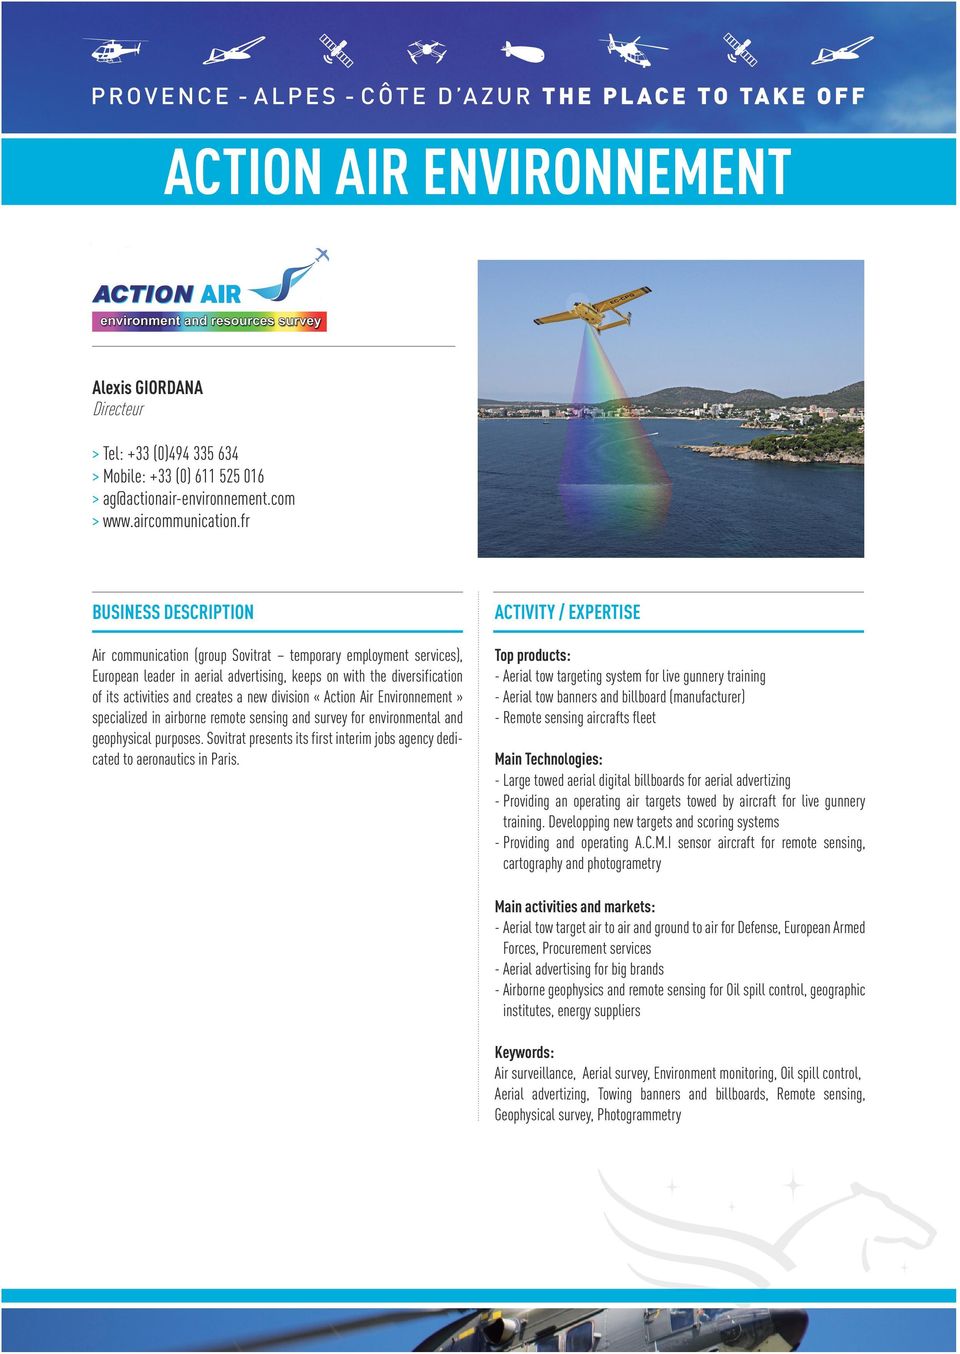 division «Action Air Environnement» specialized in airborne remote sensing and survey for environmental and geophysical purposes.